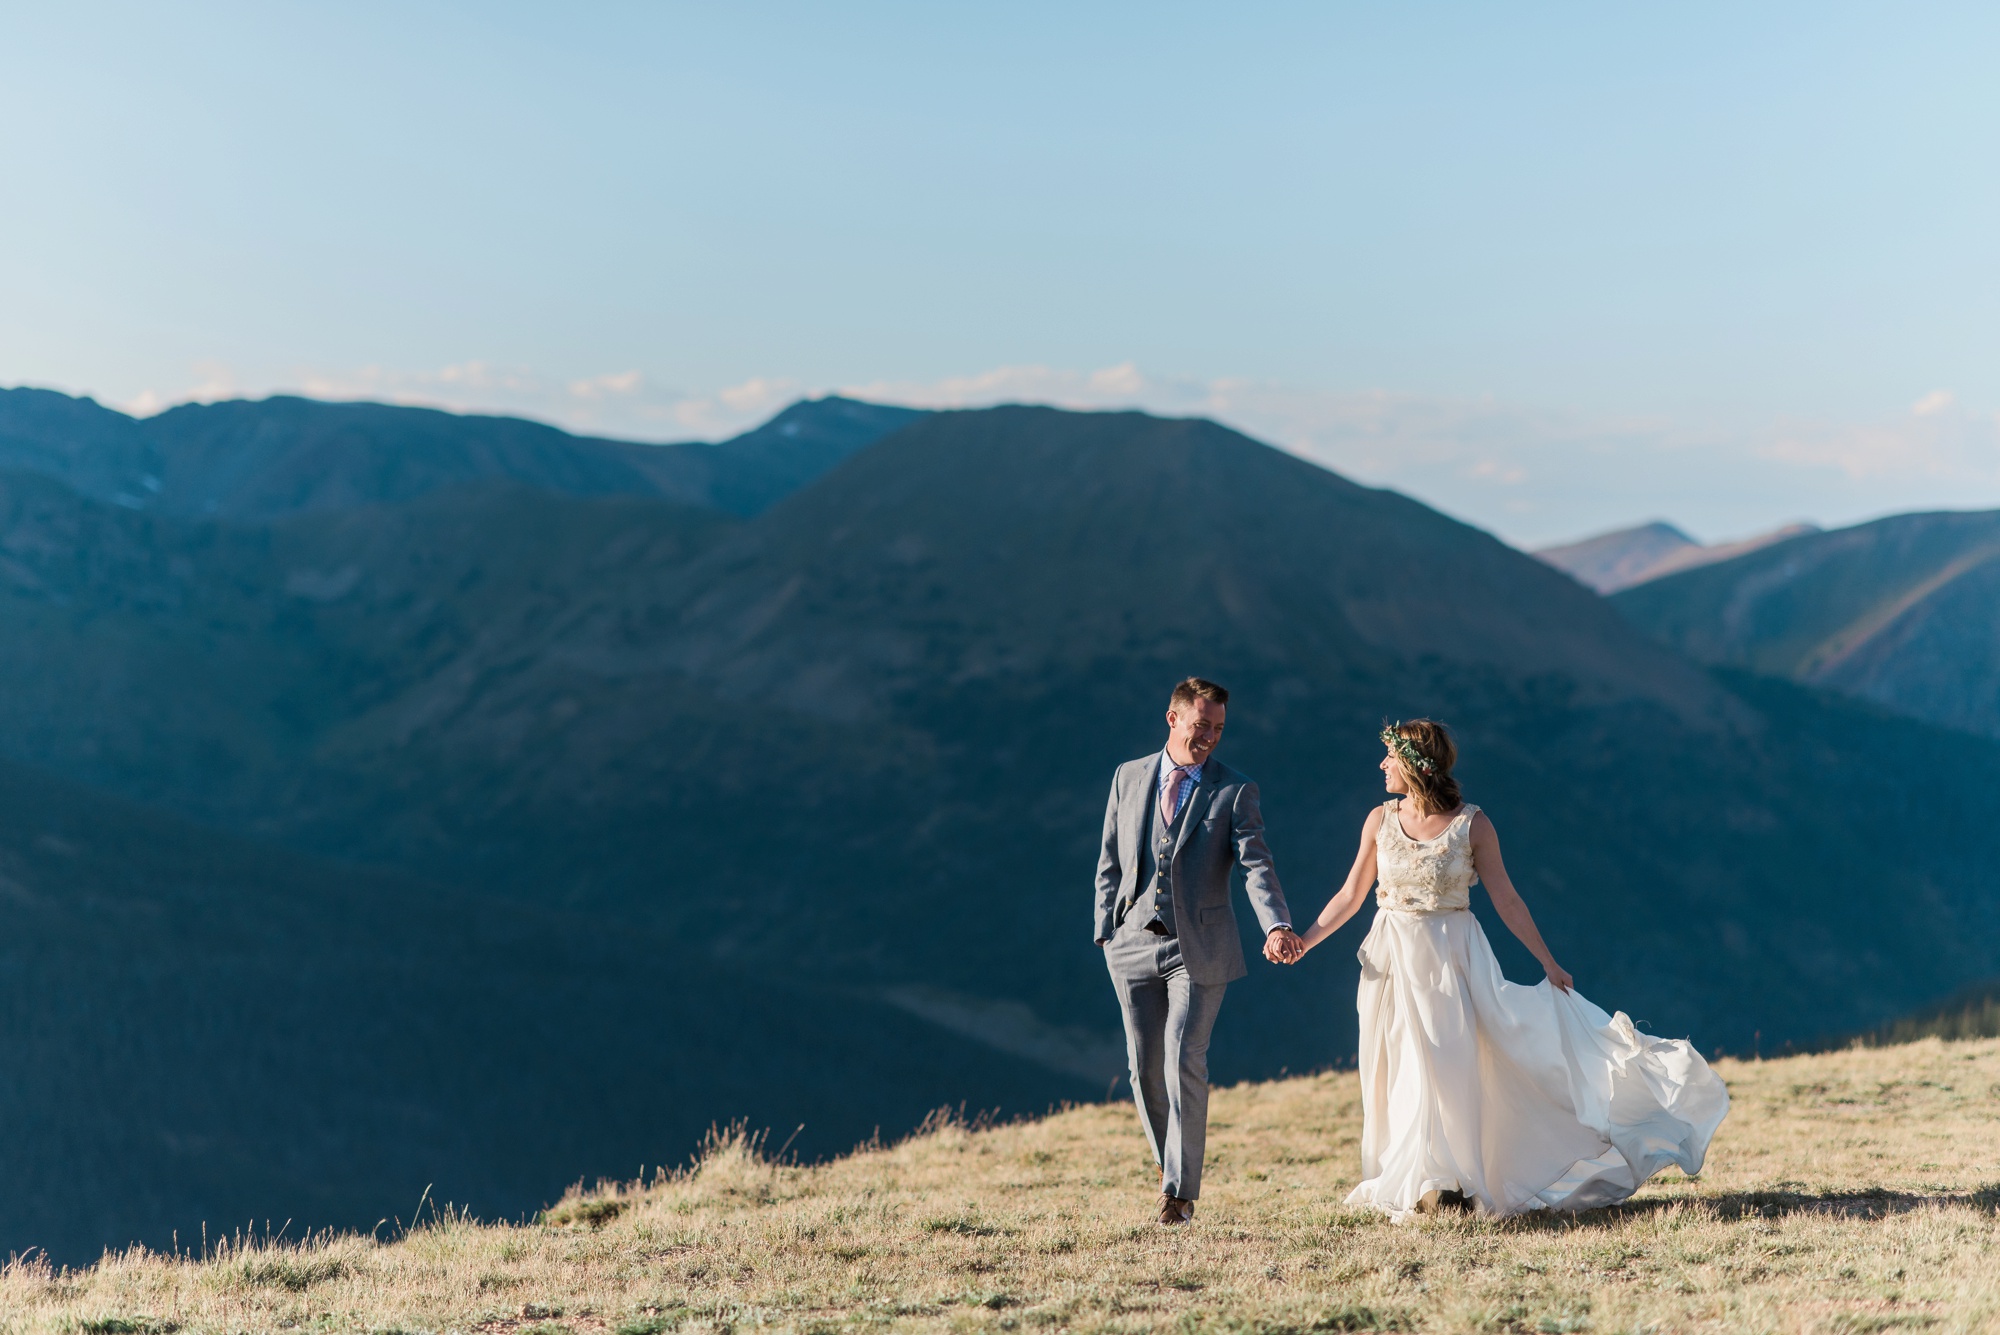 Strolling on a mountain pass in the Rocky Mountains holding hands with the love of your life while the sunshines warm on your wedding day